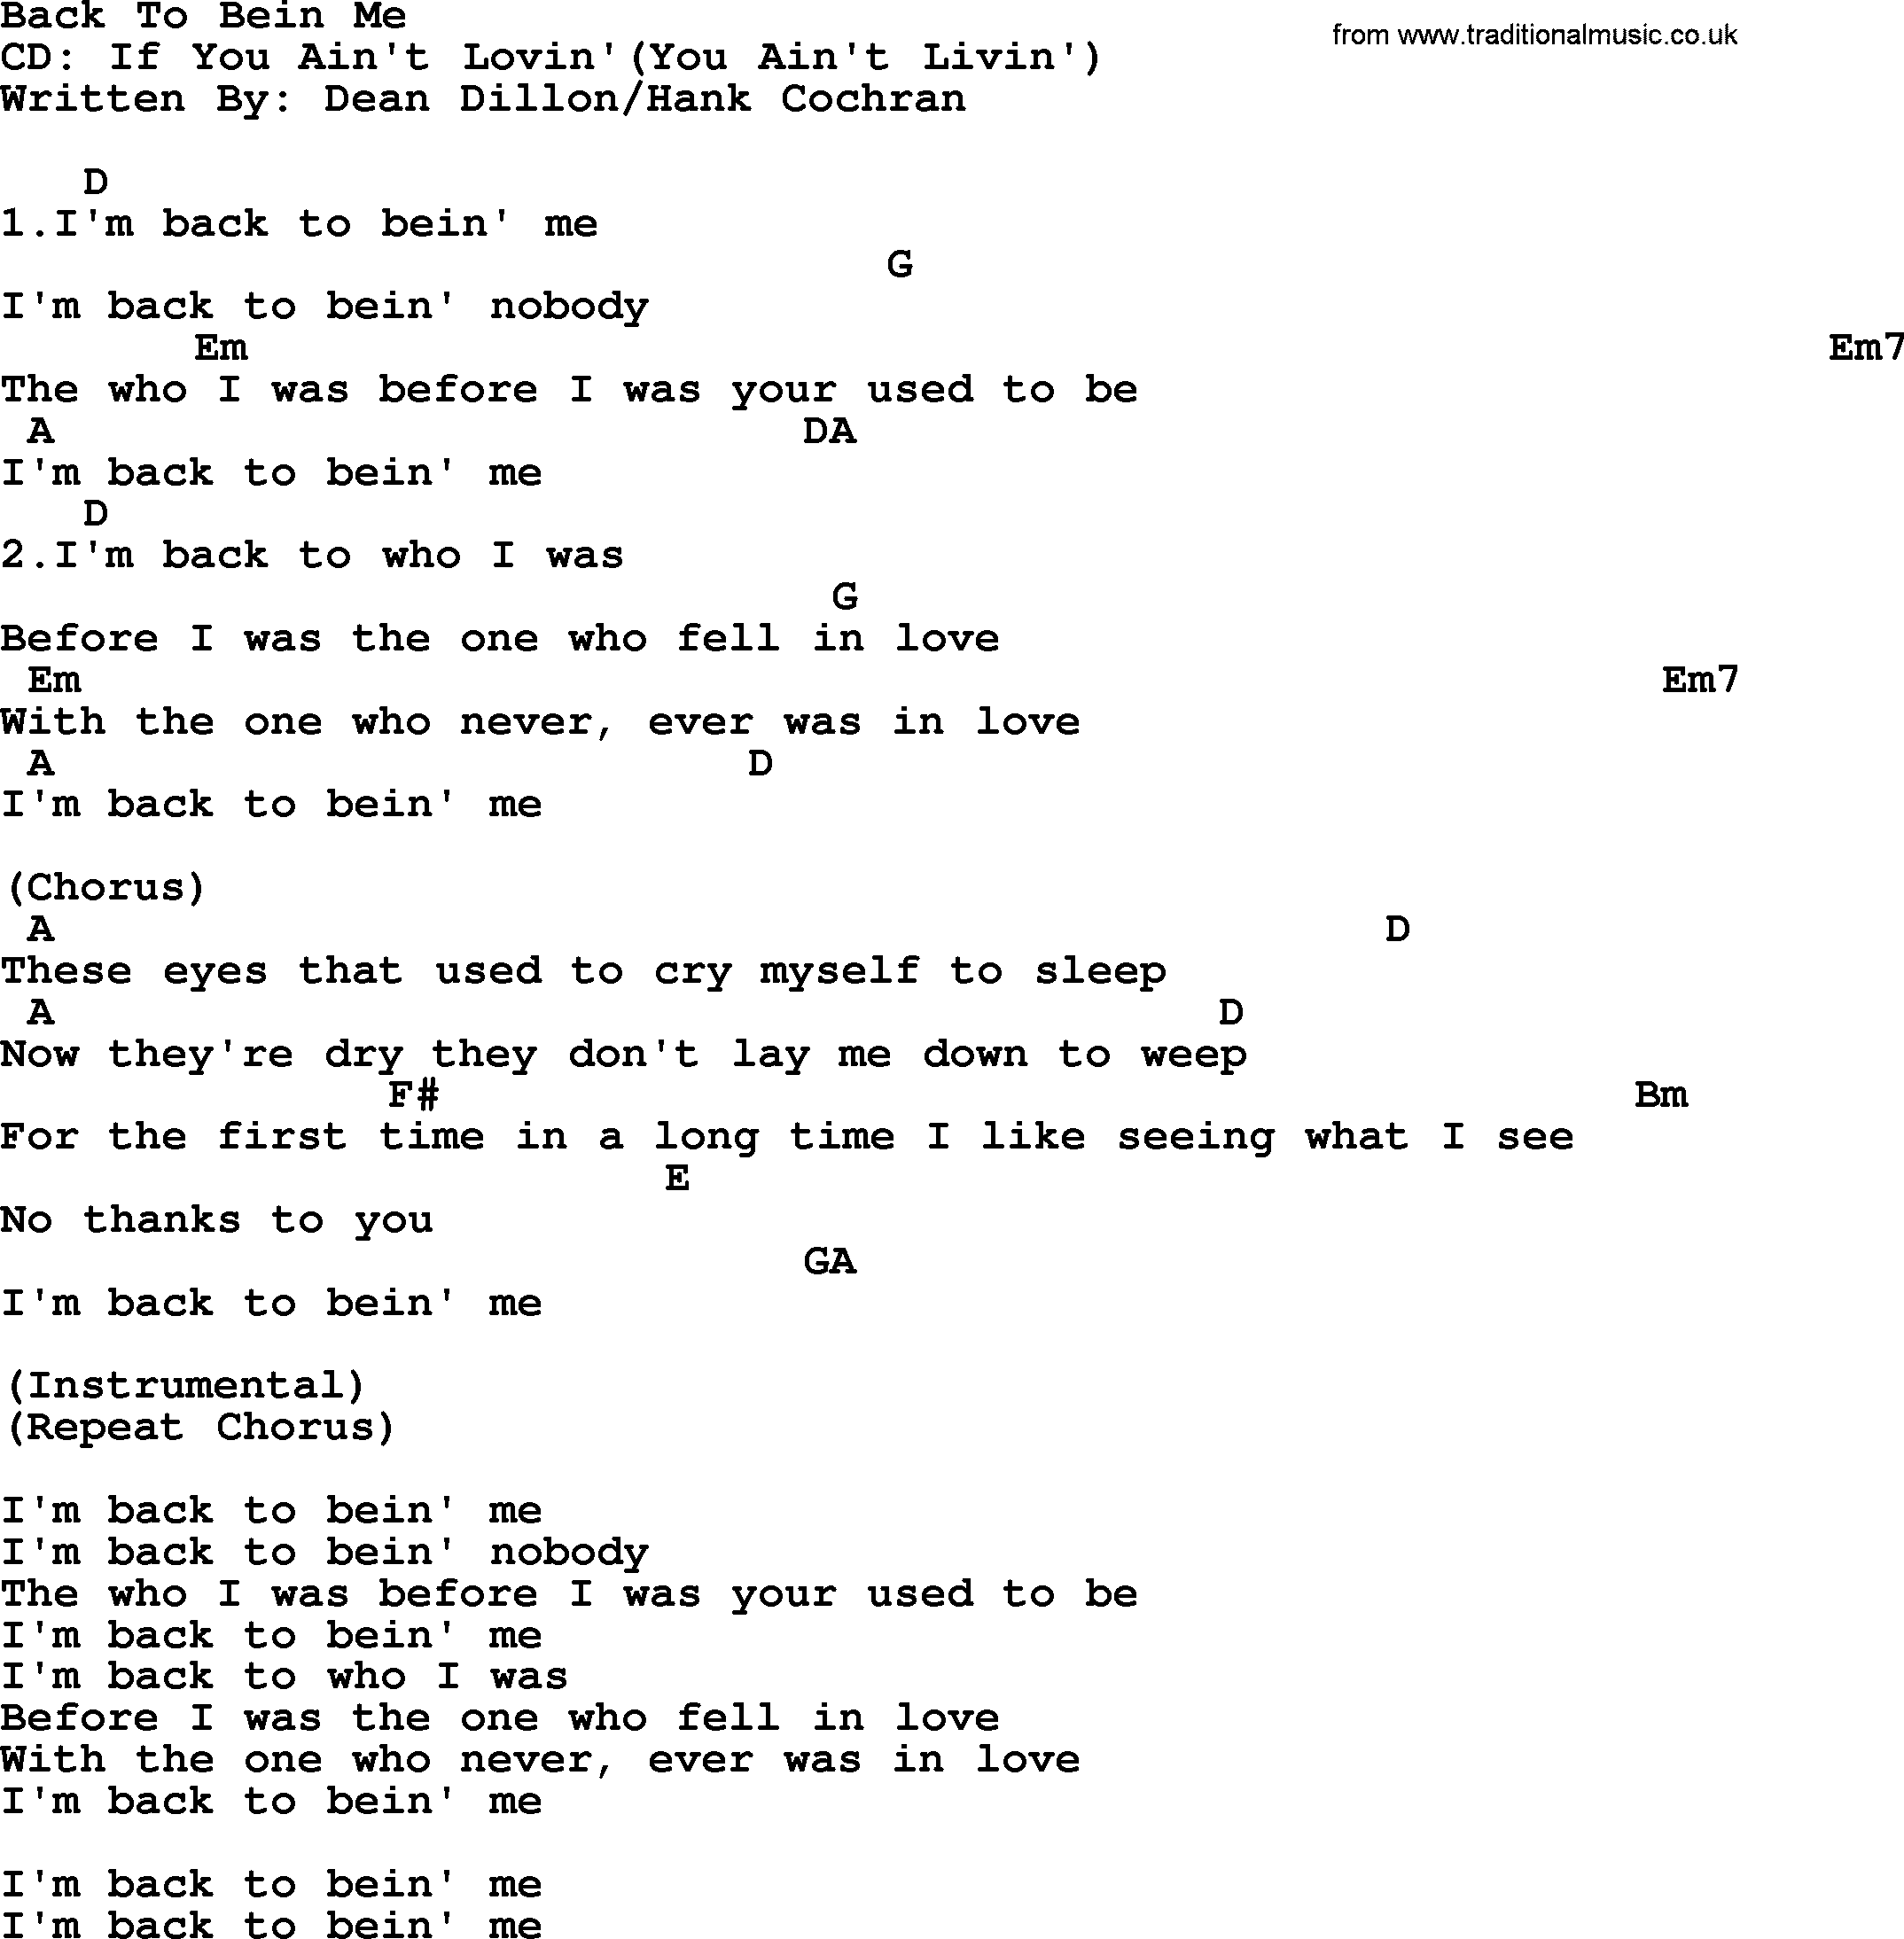 George Strait song: Back To Bein Me, lyrics and chords